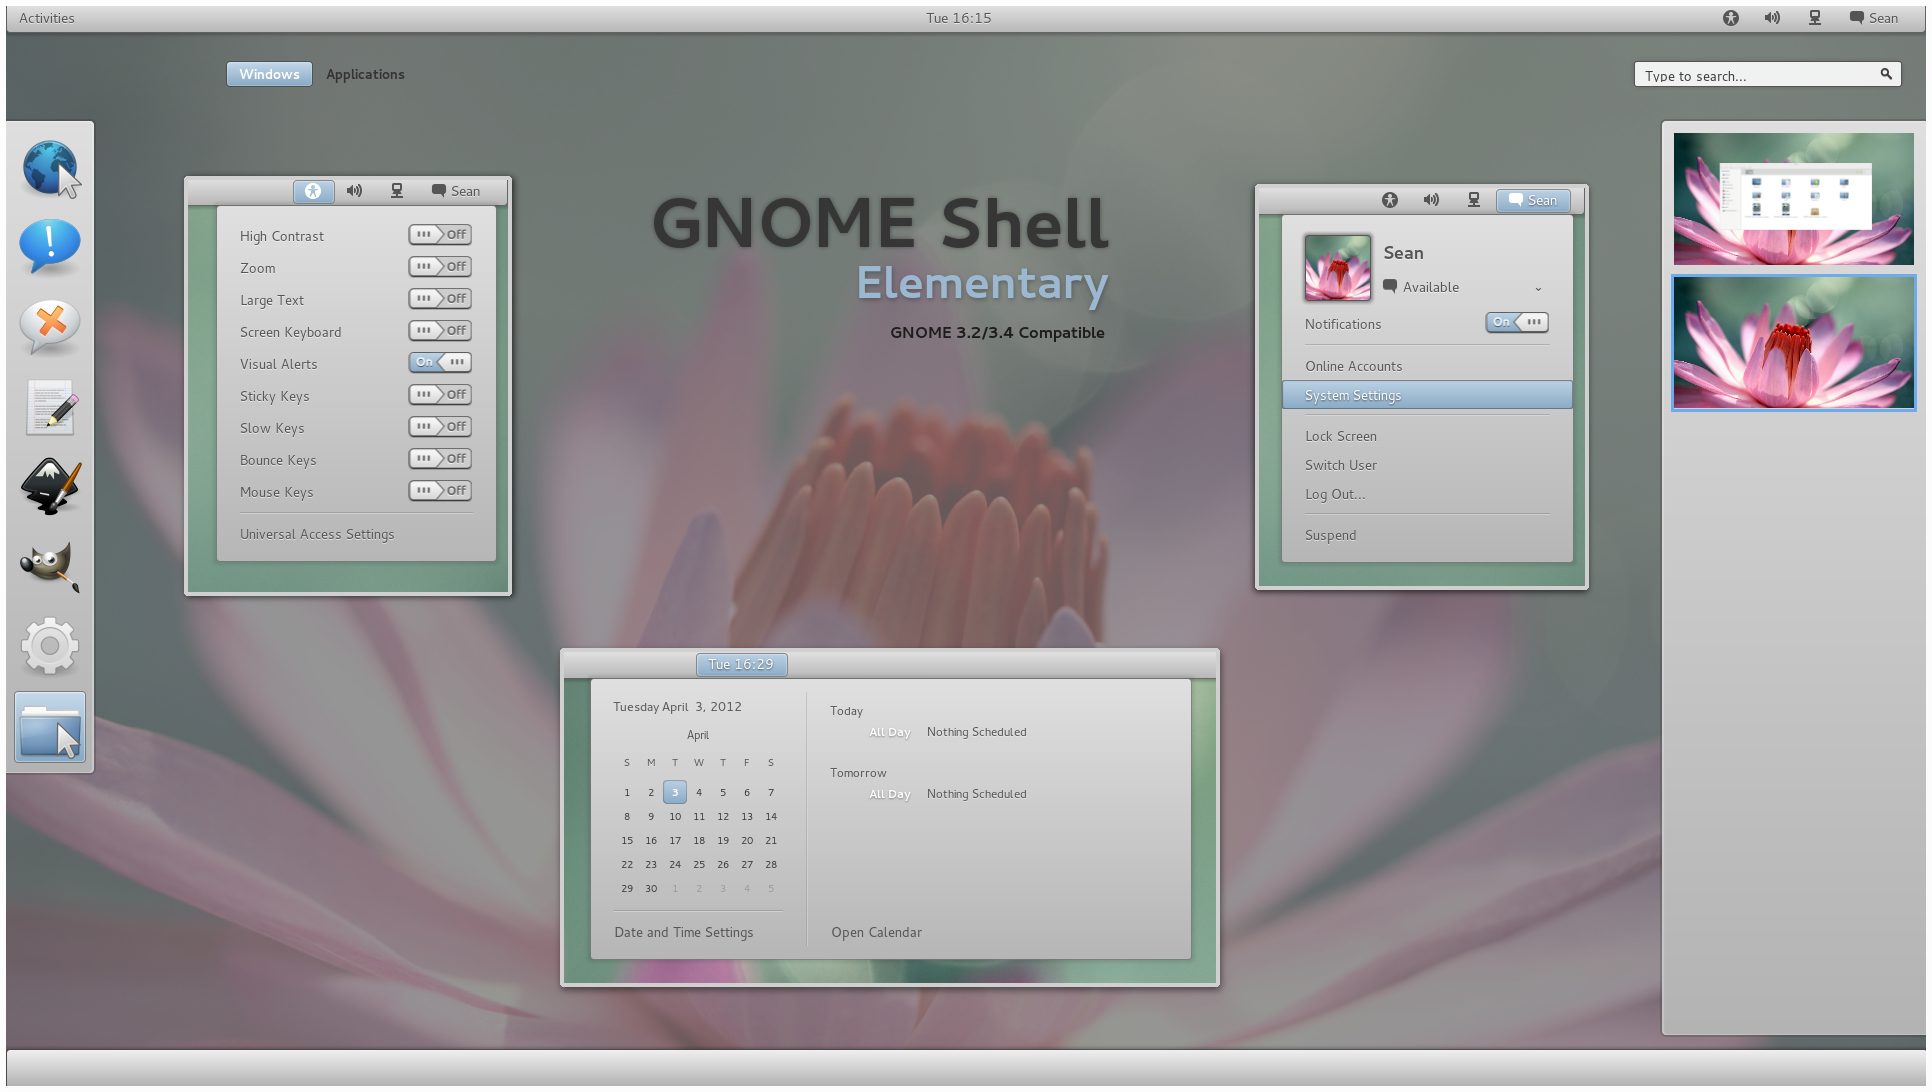 GNOME Shell - Elementary